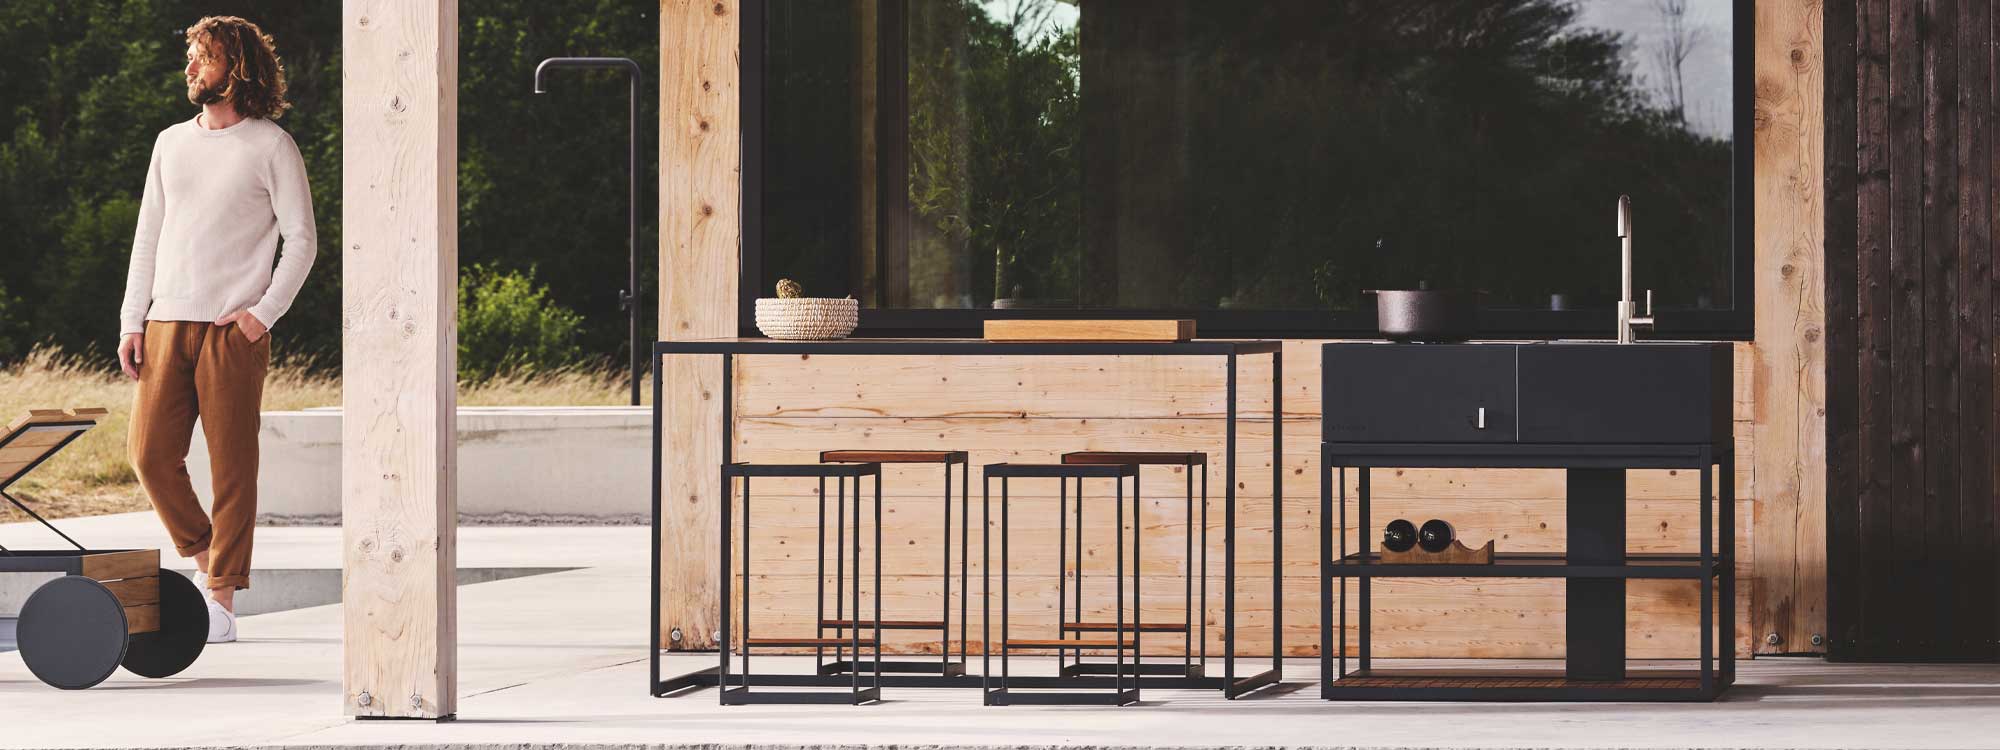 Open Bistro BBQ furniture is a range of garden bar furniture for use with Open Kitchen outdoor kitchens by Roshults modern garden kitchen Co.